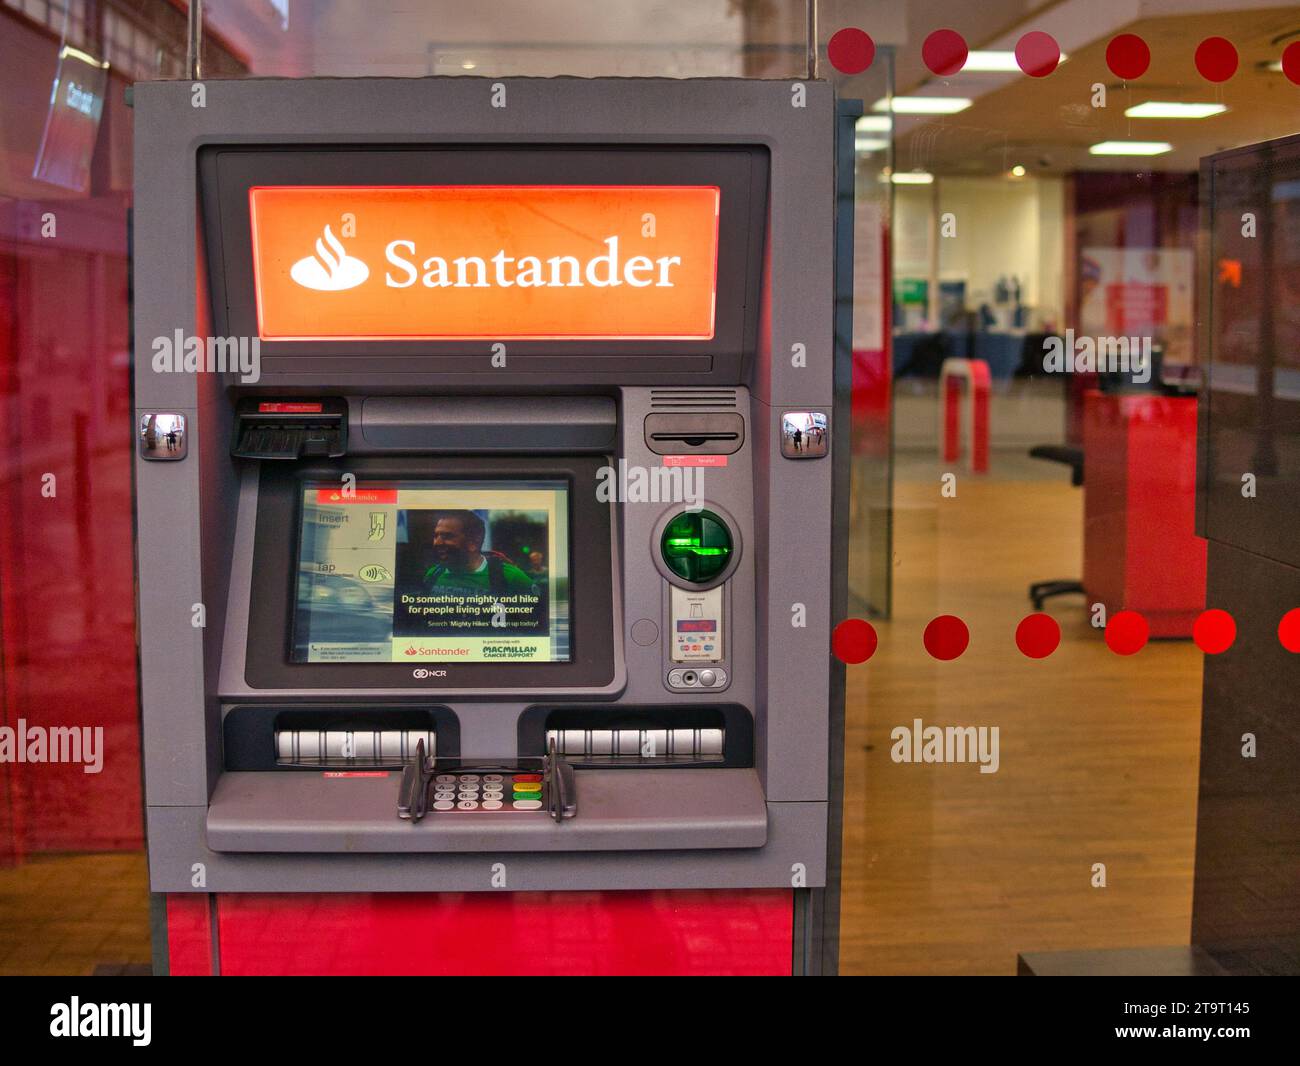 An automated teller machine (ATM) outside a branch of Santander in the UK. The interior of the bank is visible in the background. Stock Photo